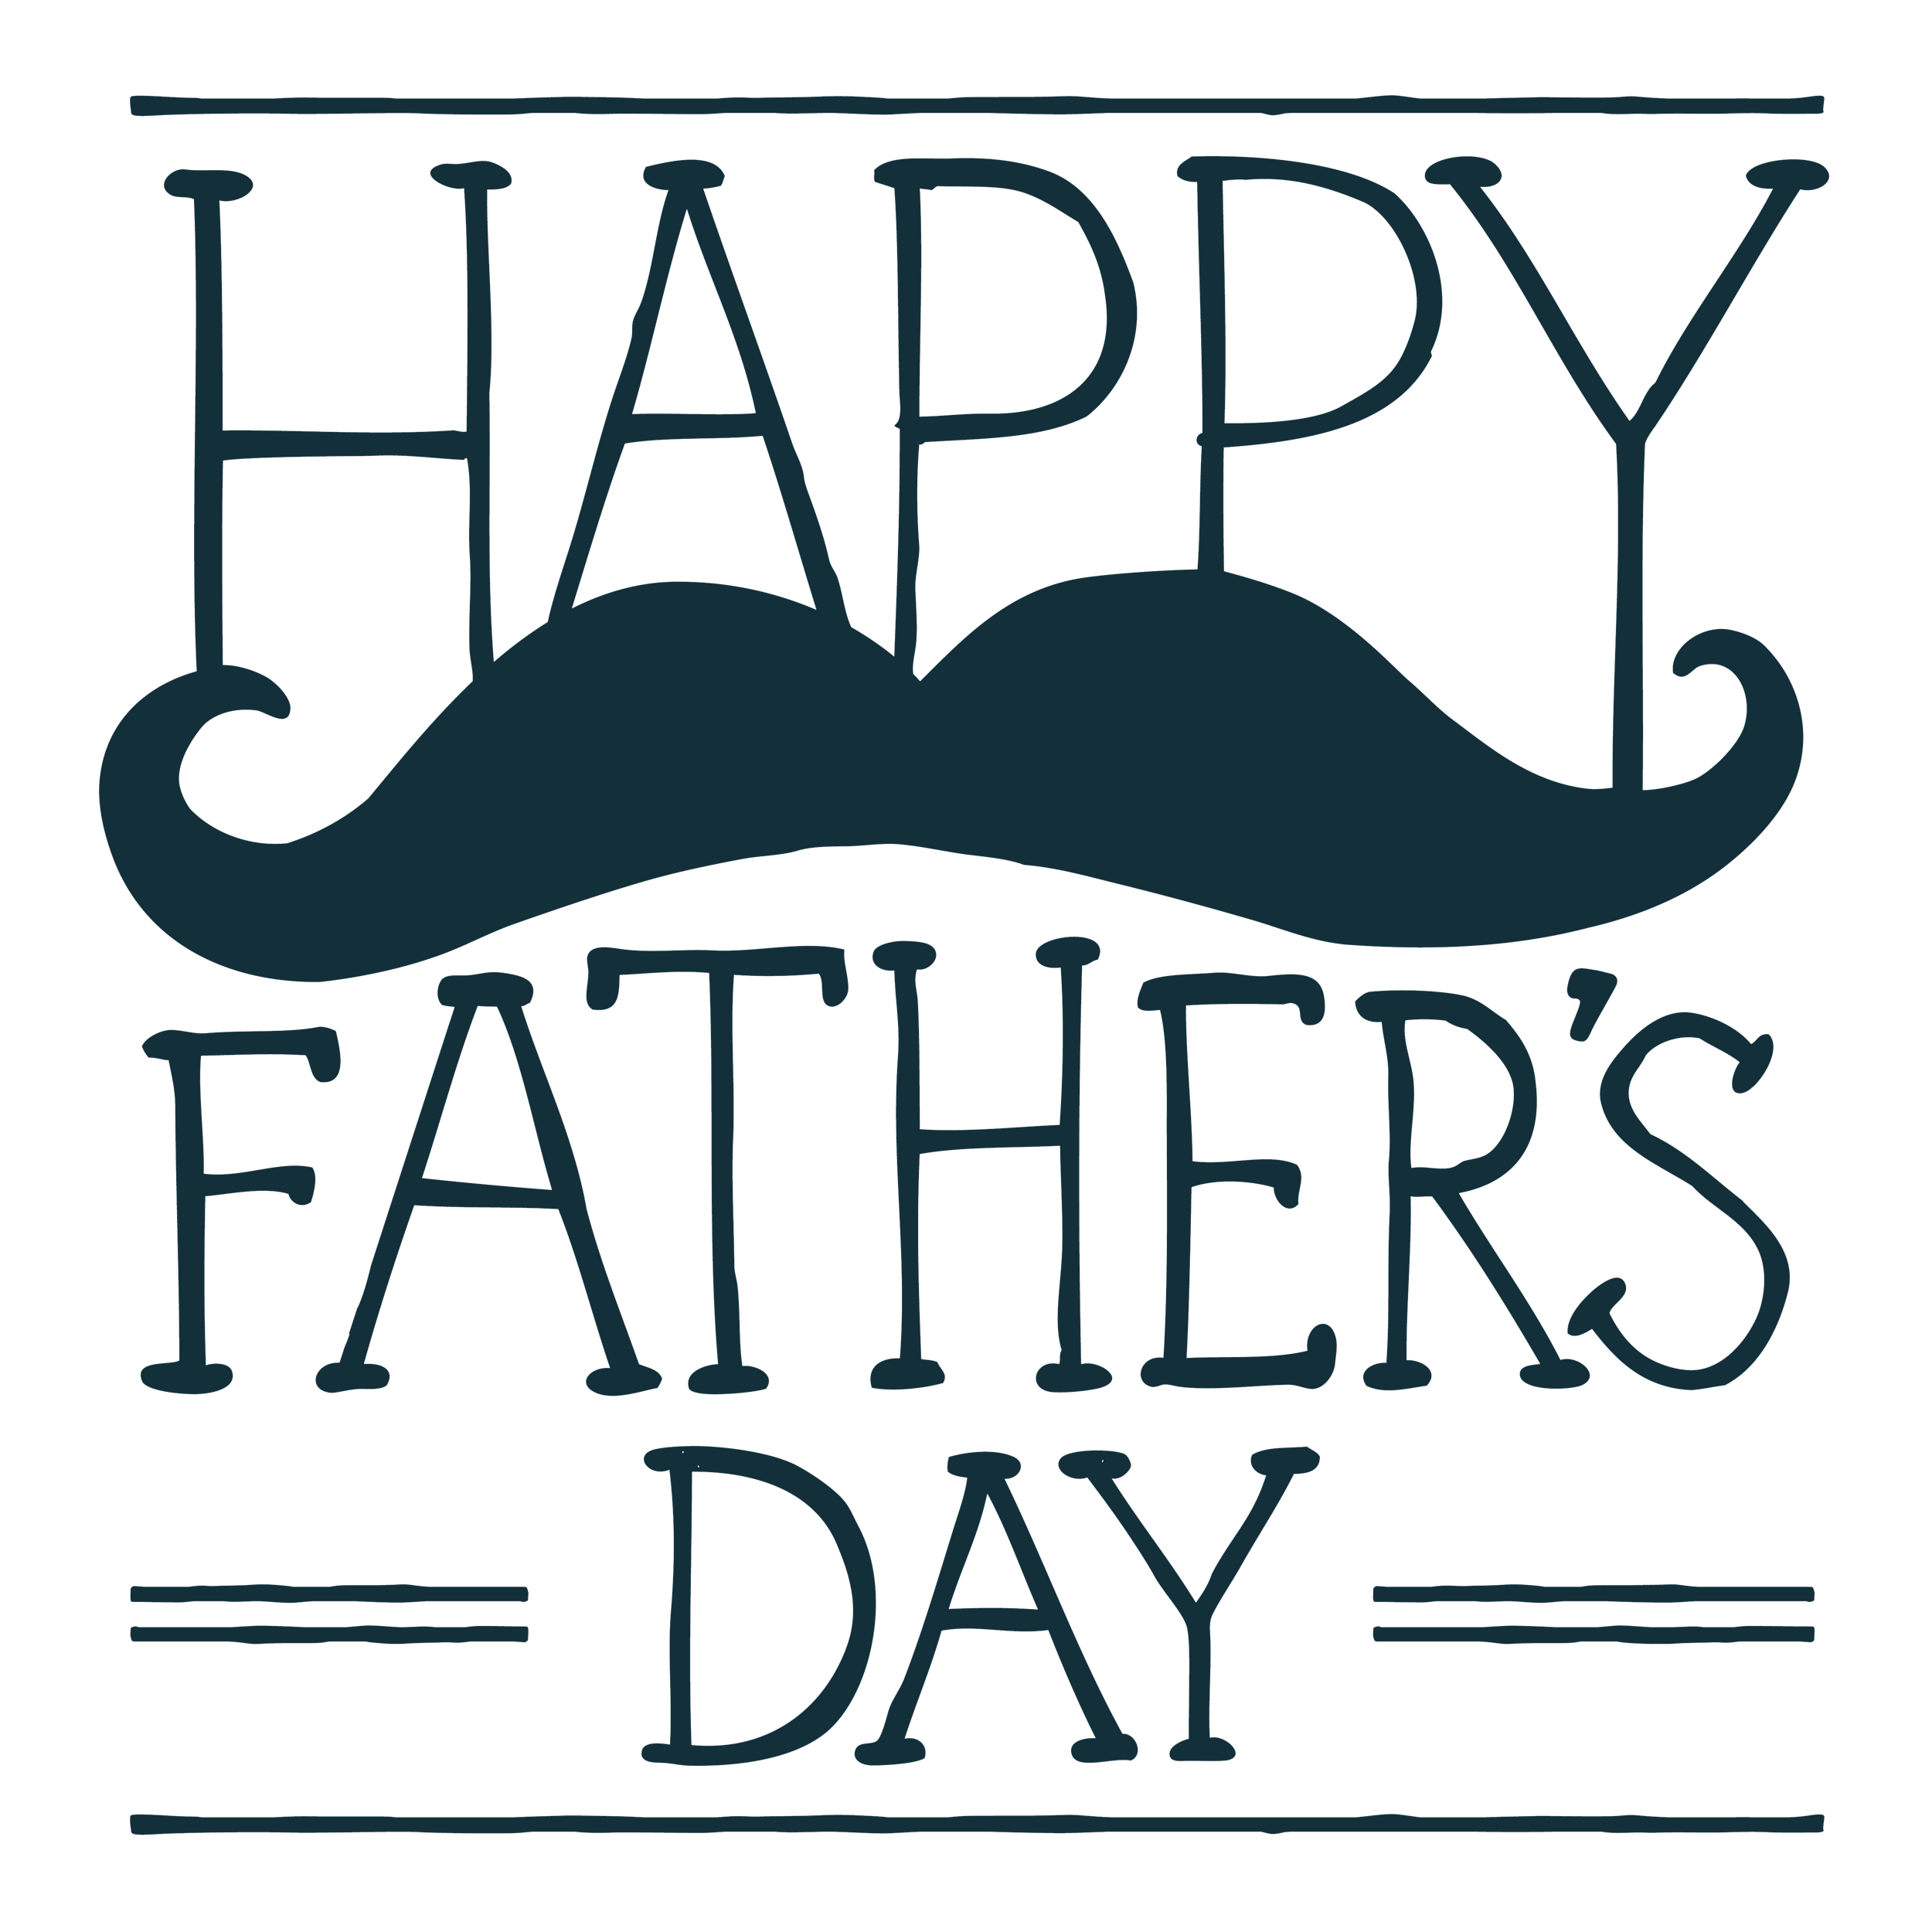 free-father-s-day-png-transparent-images-download-free-father-s-day